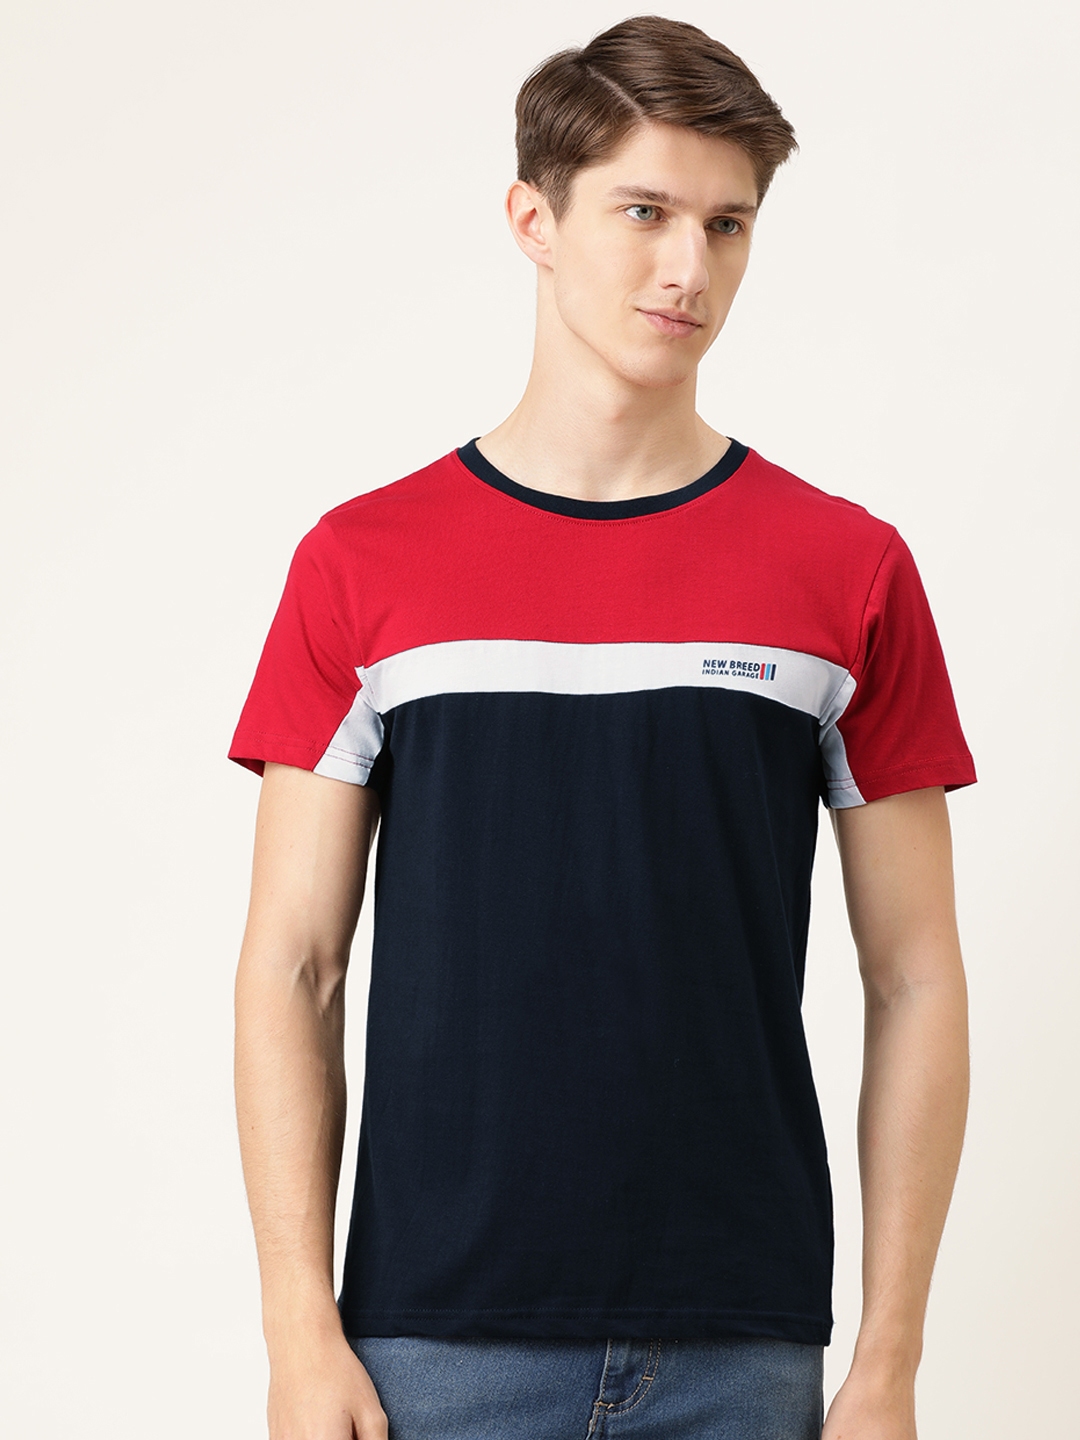 Buy The Indian Garage Co Men Navy Blue Red Colourblocked Round Neck ...